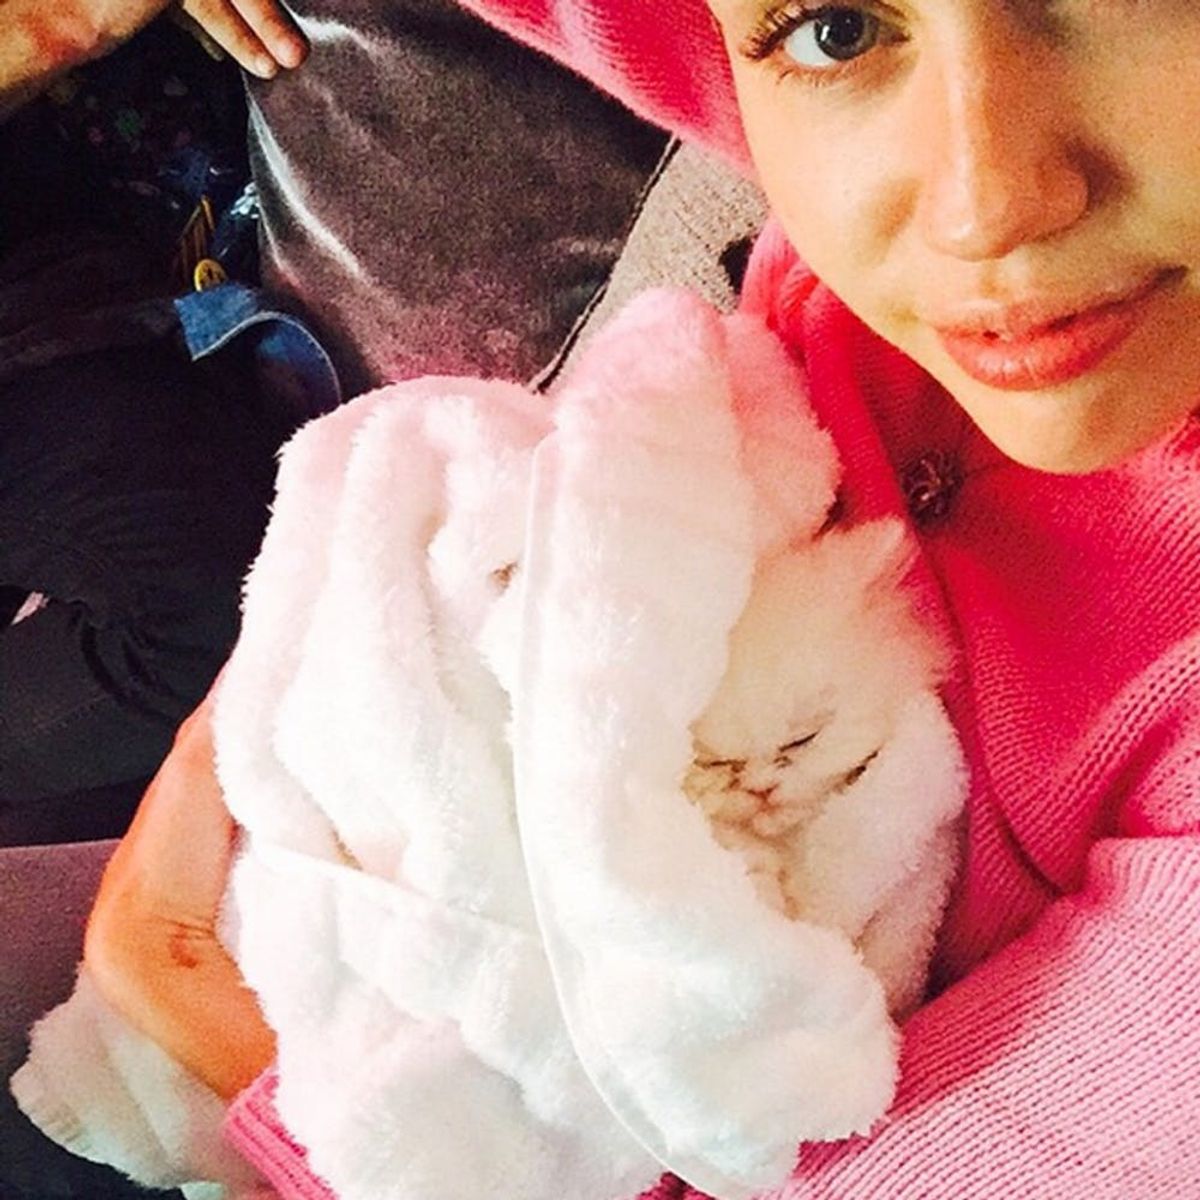 Miley Cyrus’ New Cat Is About to be the Next Instagram Star